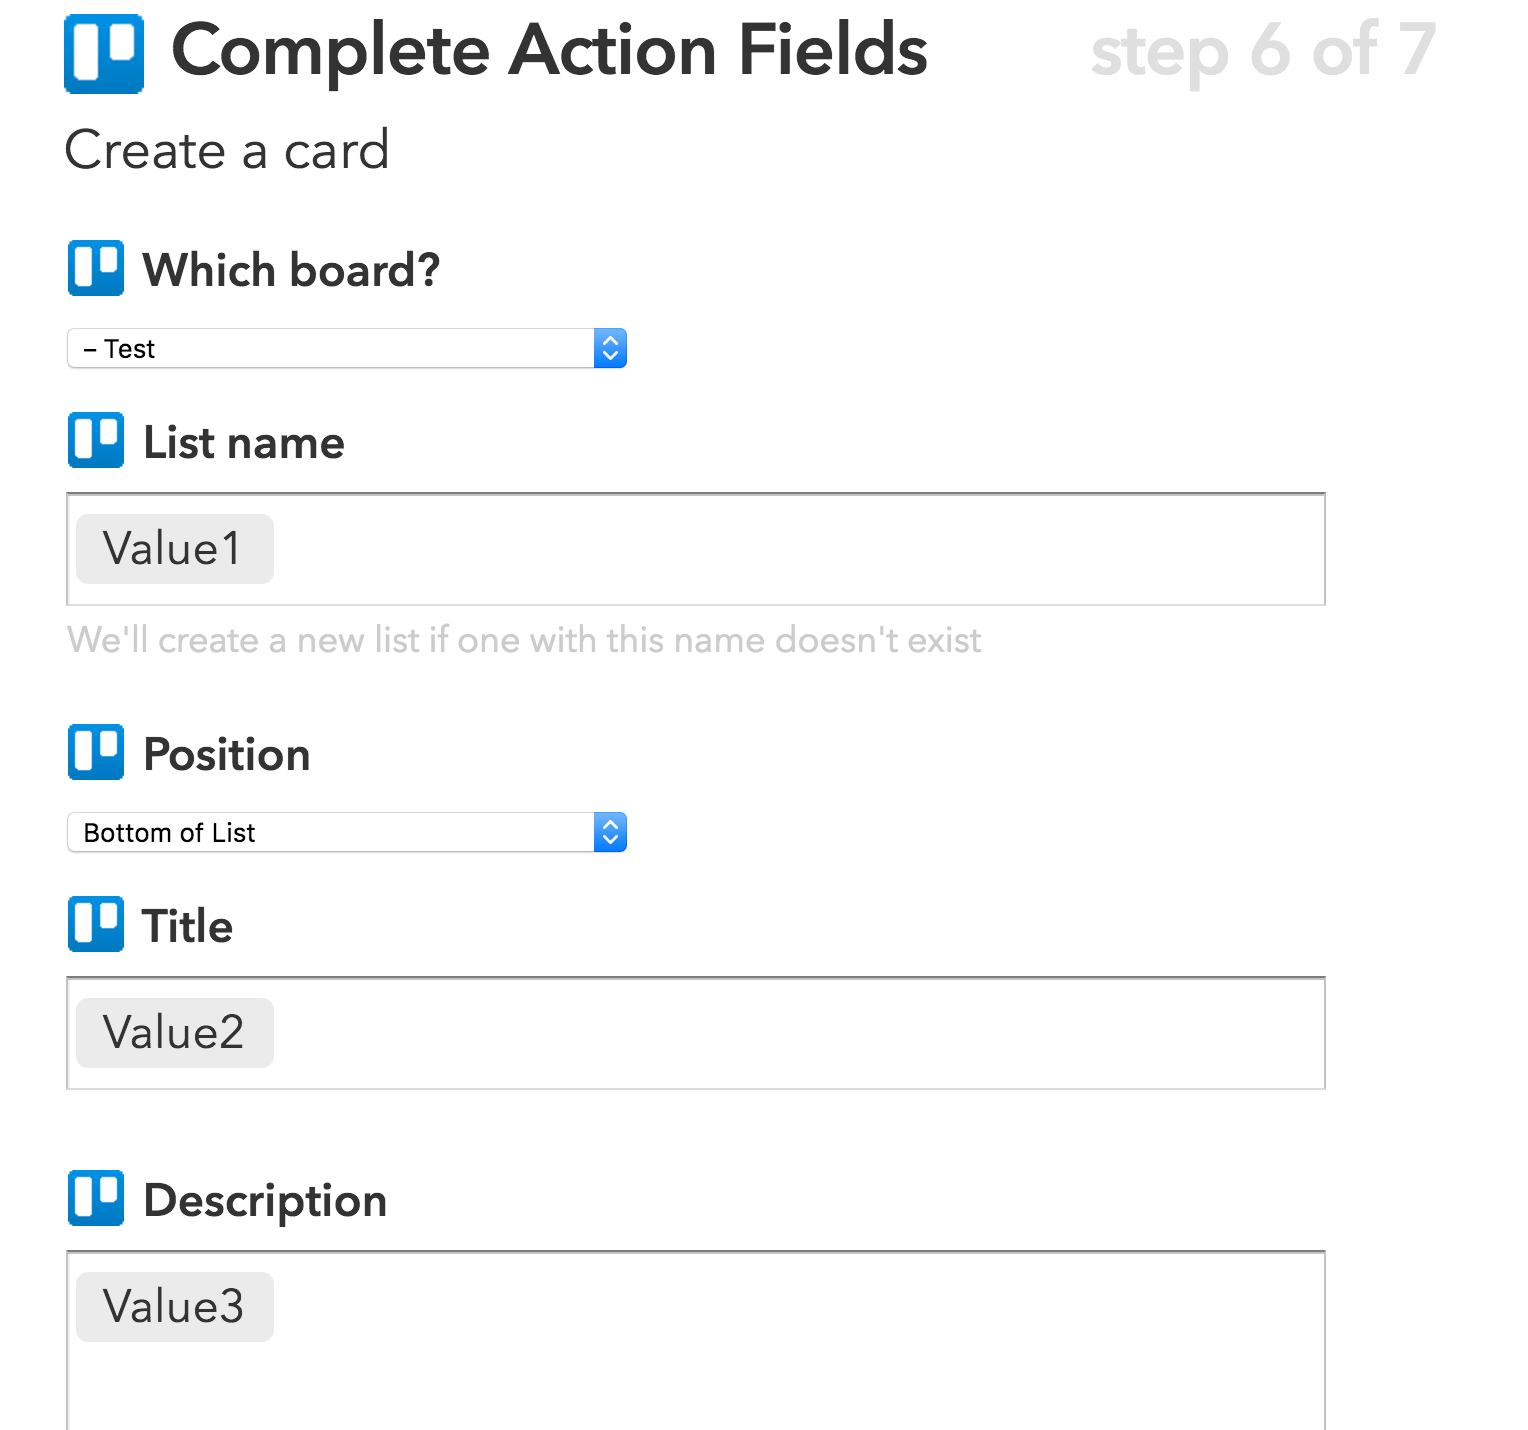 Image of filling out card fields